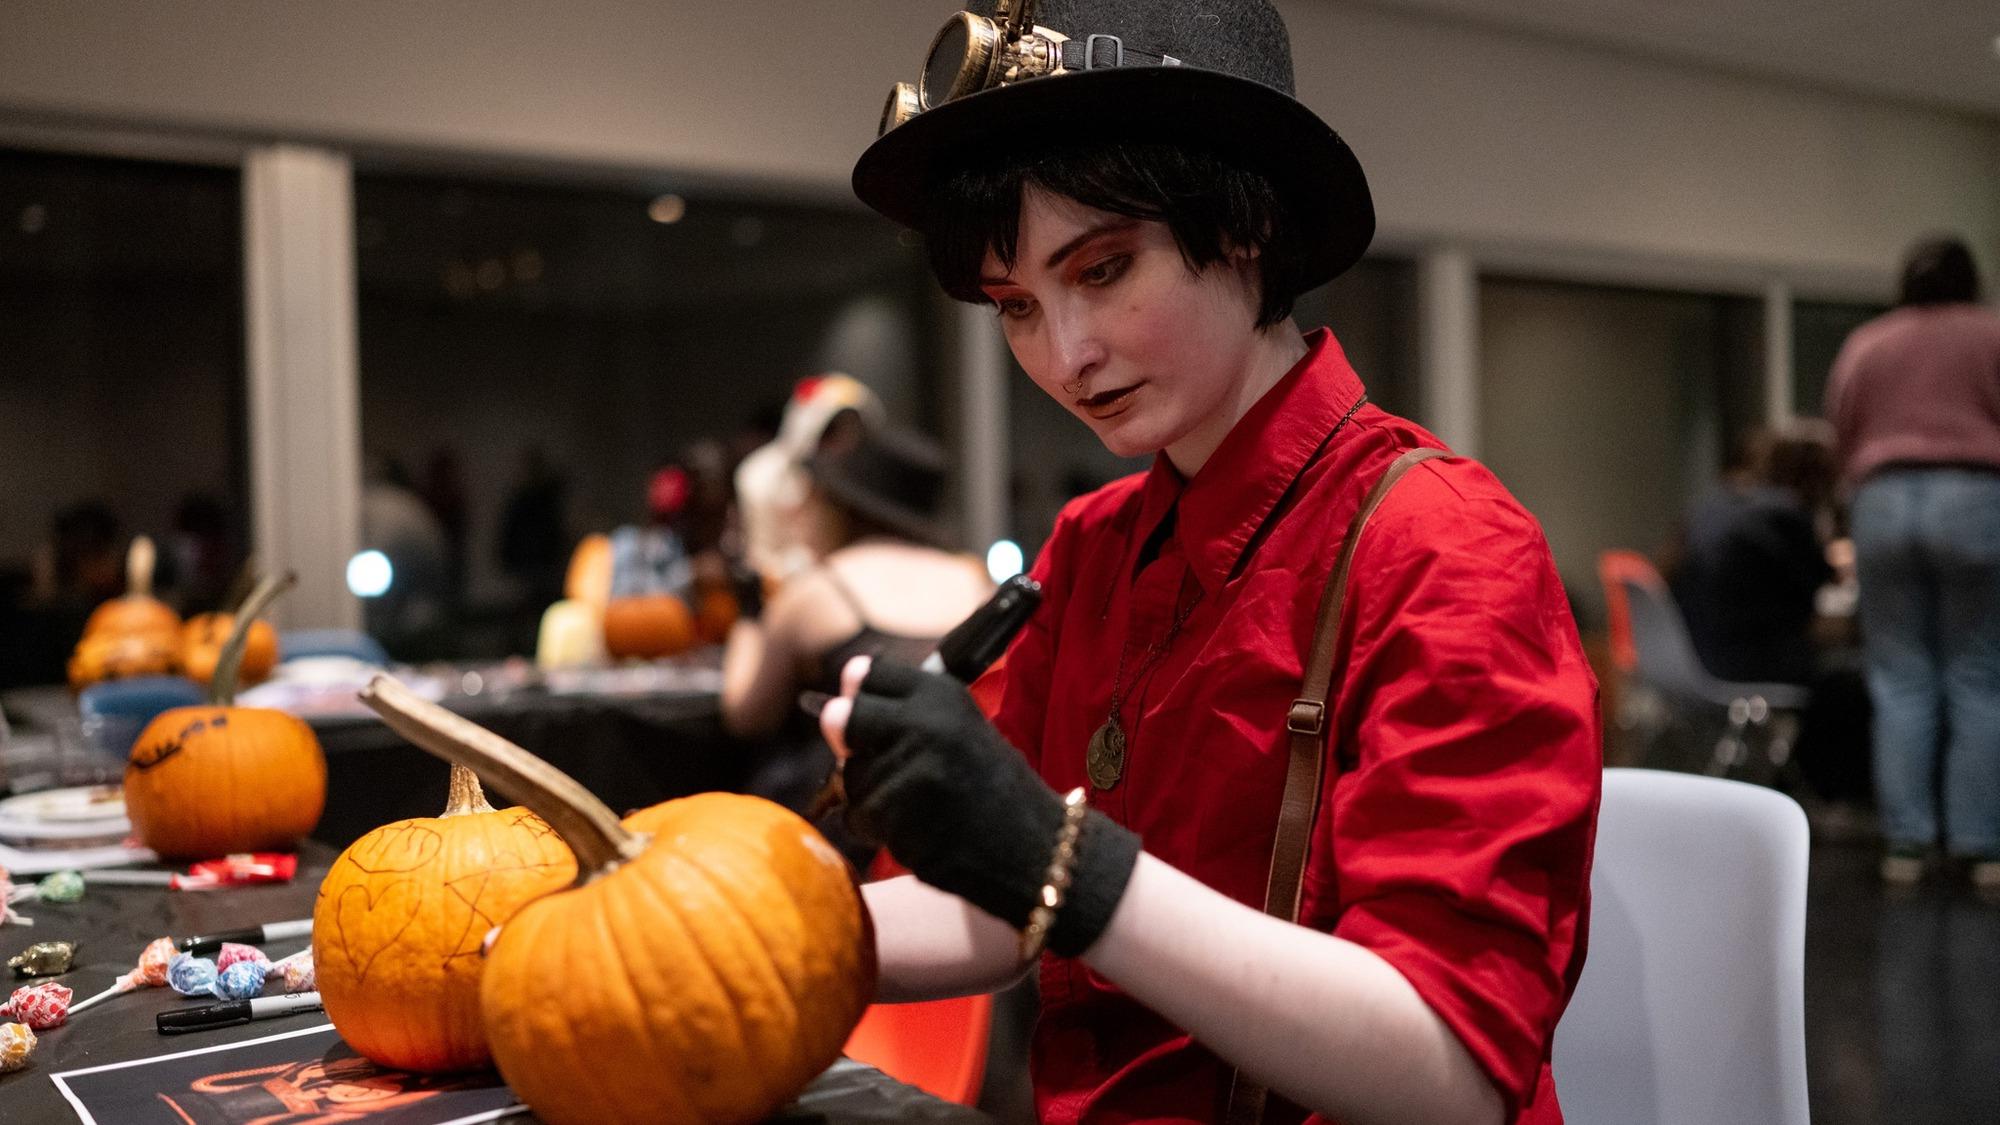 A student in an outfit that evokes the steampunk aesthetic decorates pumpkins at a table in the Tang.